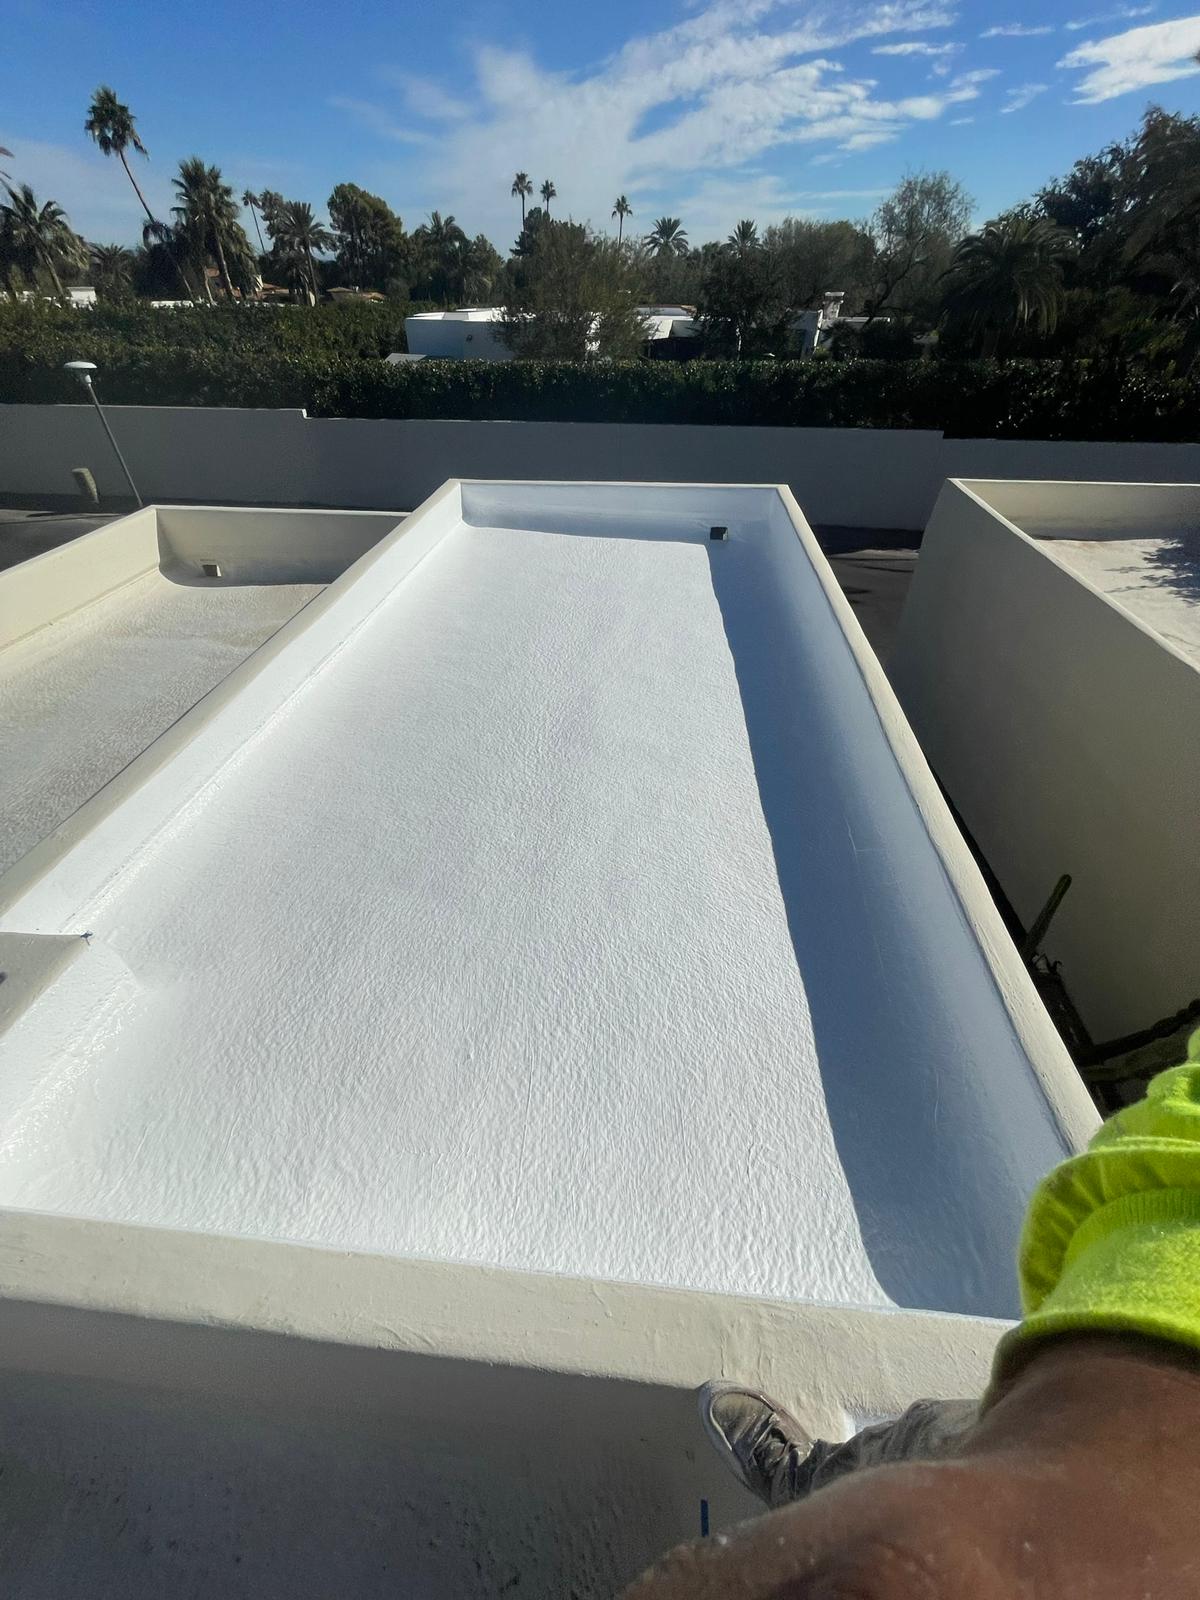 Elevated view of a Gilbert neighborhood with a flat roof showcasing a complete application of spray foam awaiting the coating process.